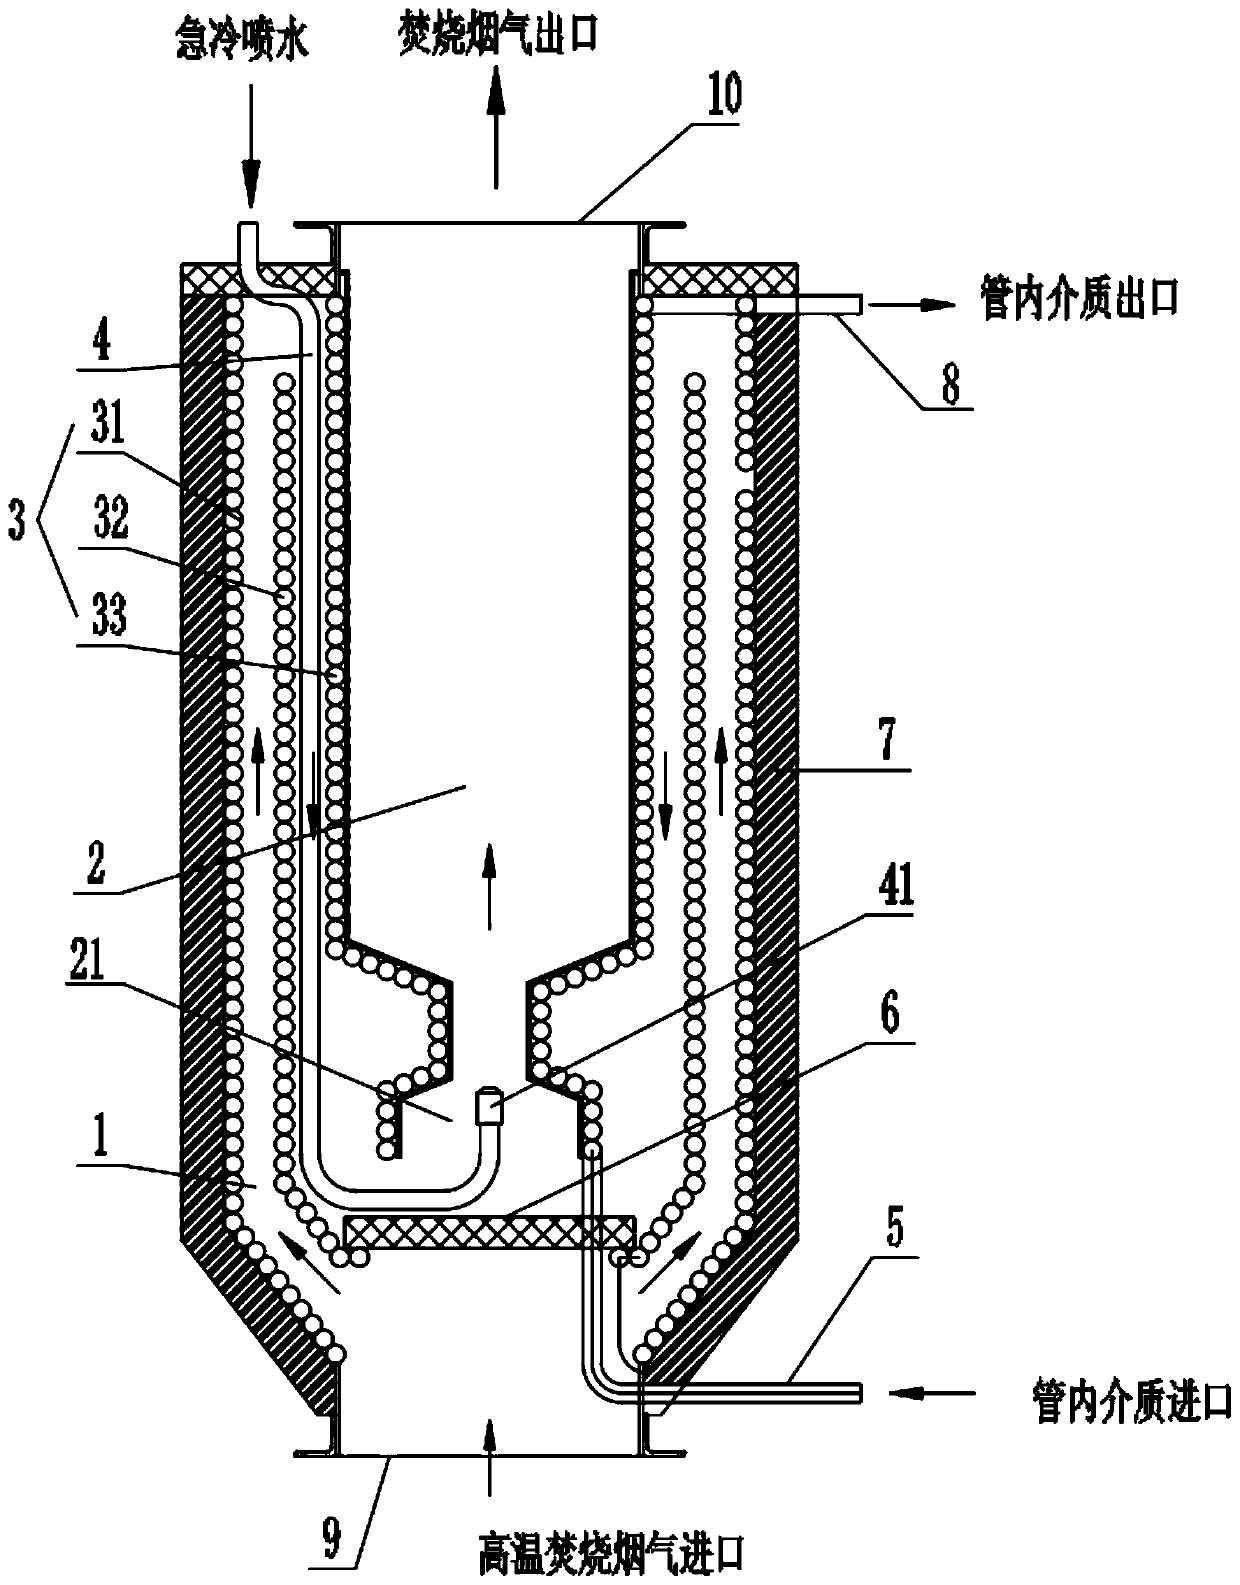 Waste incineration flue gas cooling and quenching integrated device